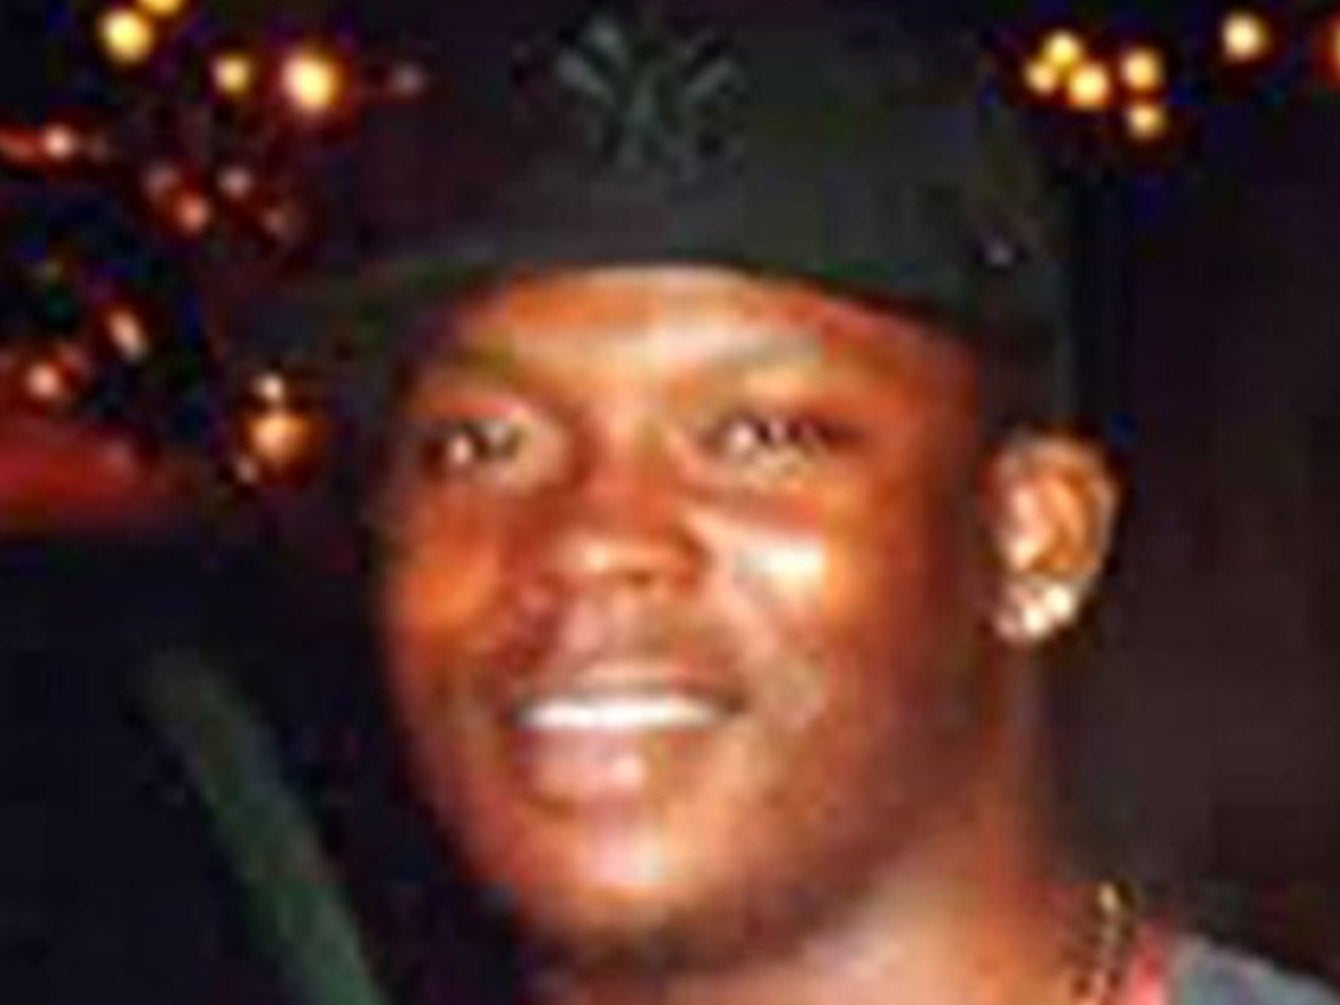 Kingsley Burrell, 29, who died after being detained under the Mental Health Act